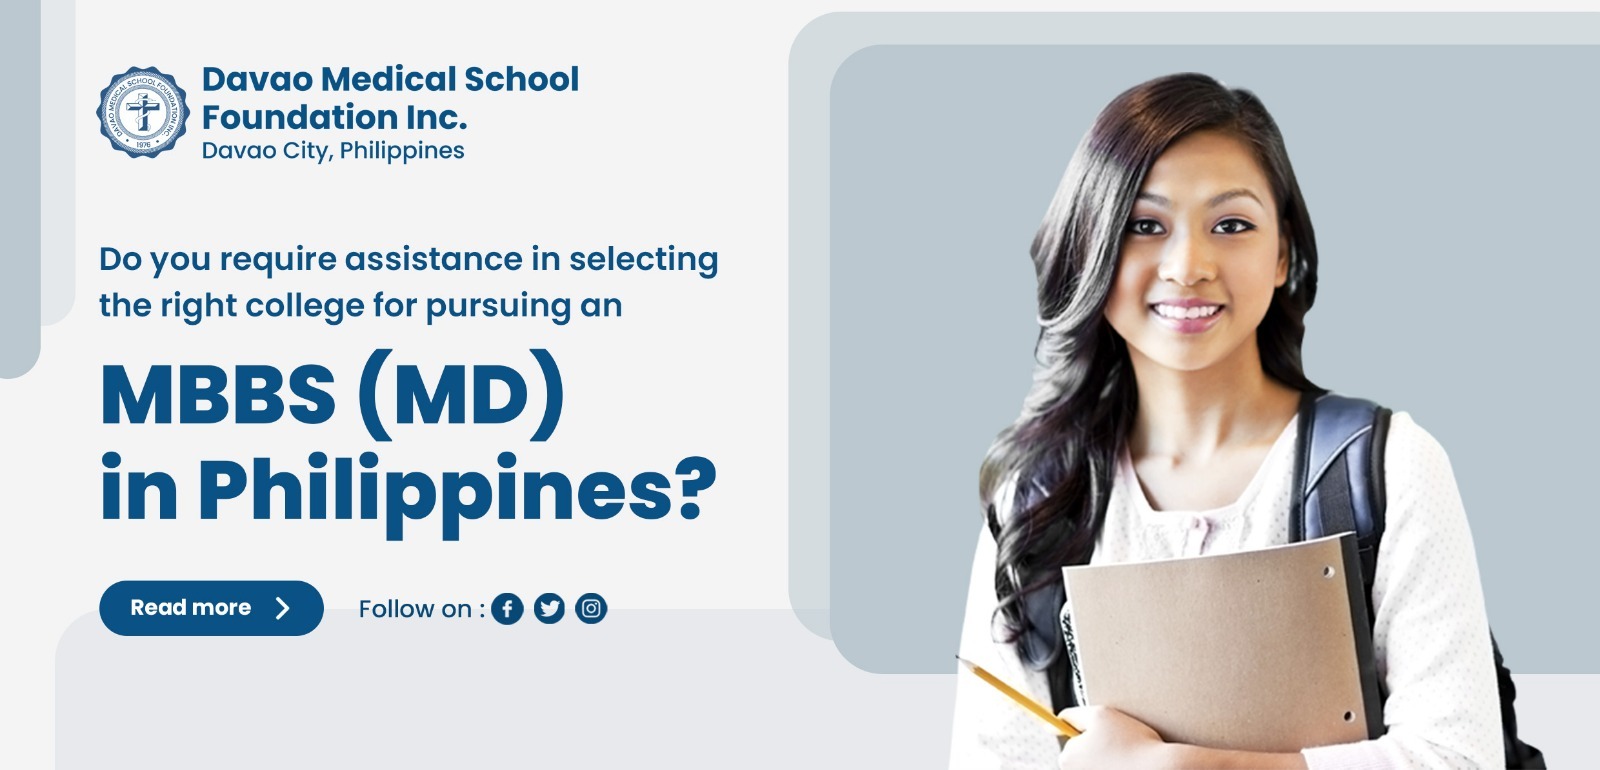 Do you require assistance in selecting the right college for pursuing an MBBS (MD) in Philippines?